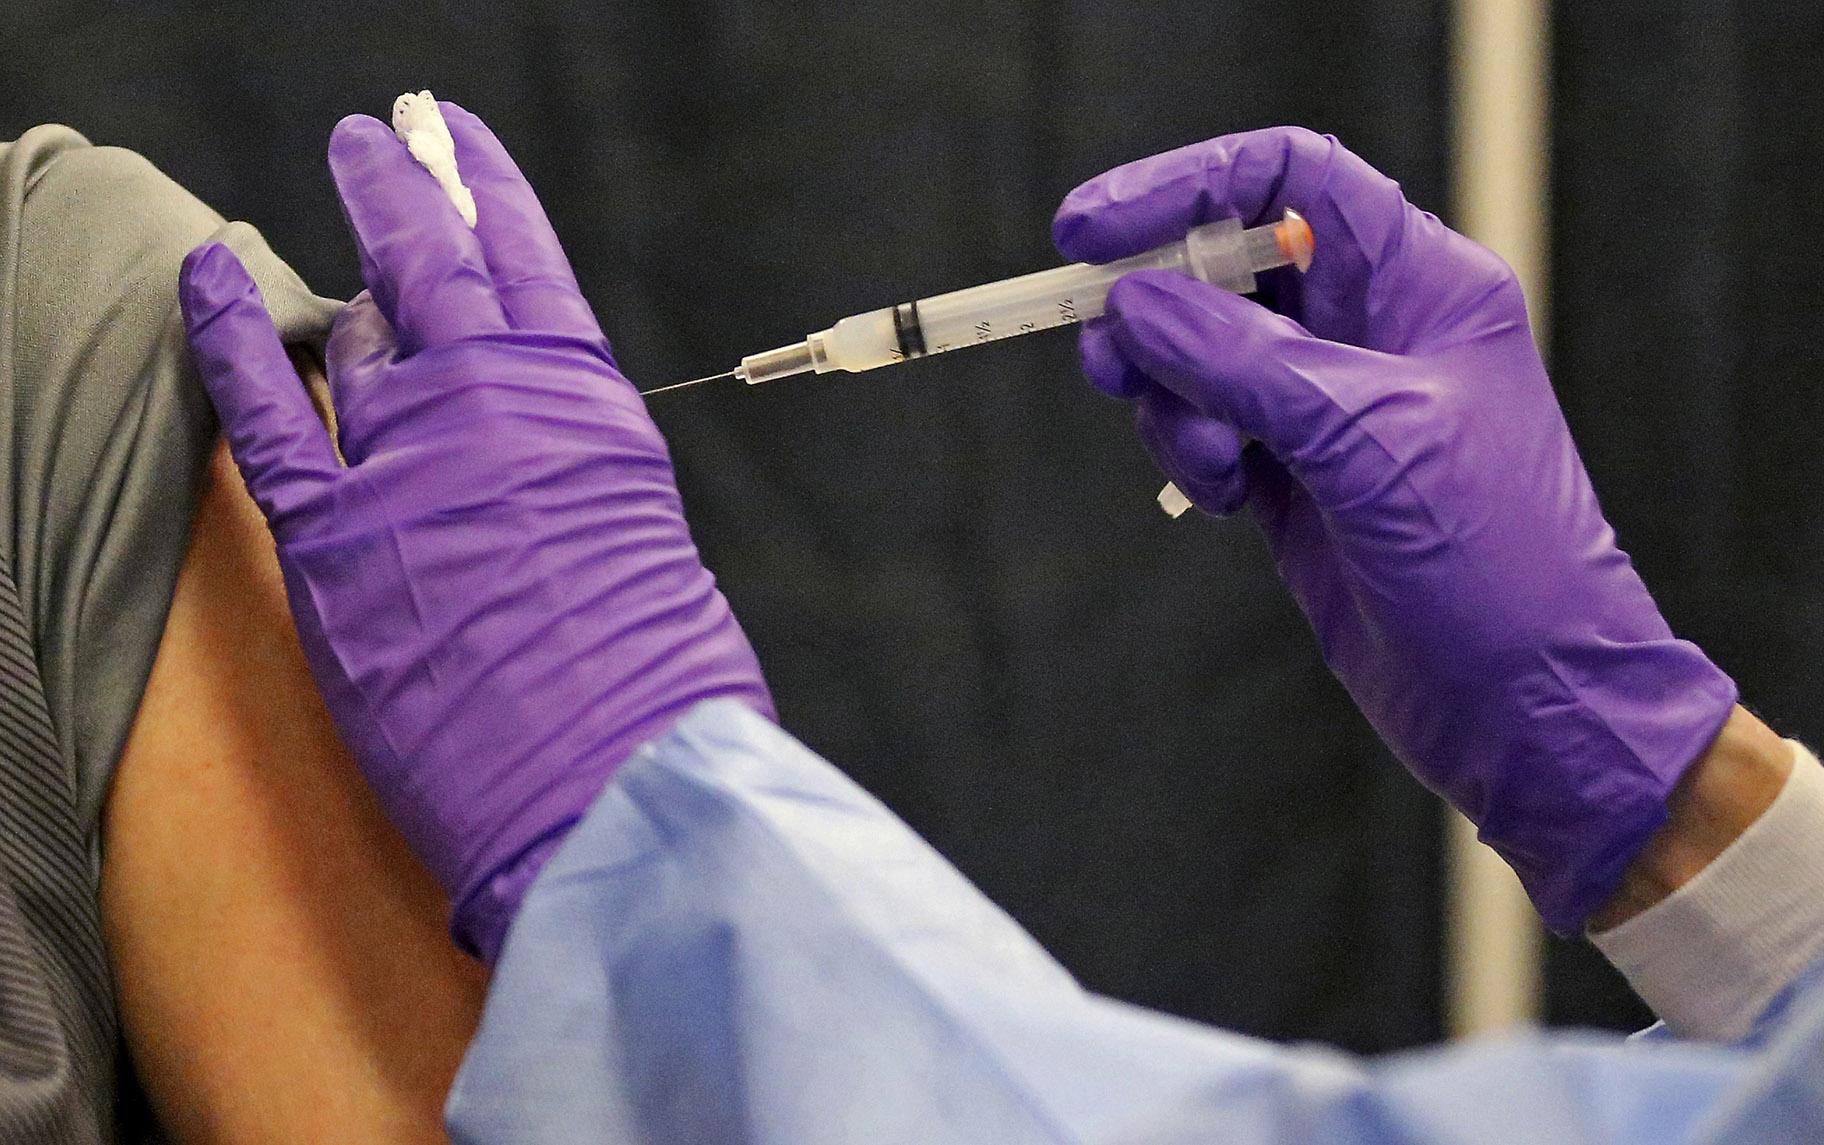 A man gets a COVID-19 vaccine at a mass vaccination site at the Natick Mall on Wednesday, Feb. 24, 2021, in Natick, Mass. (Matt Stone / The Boston Herald via AP, Pool)